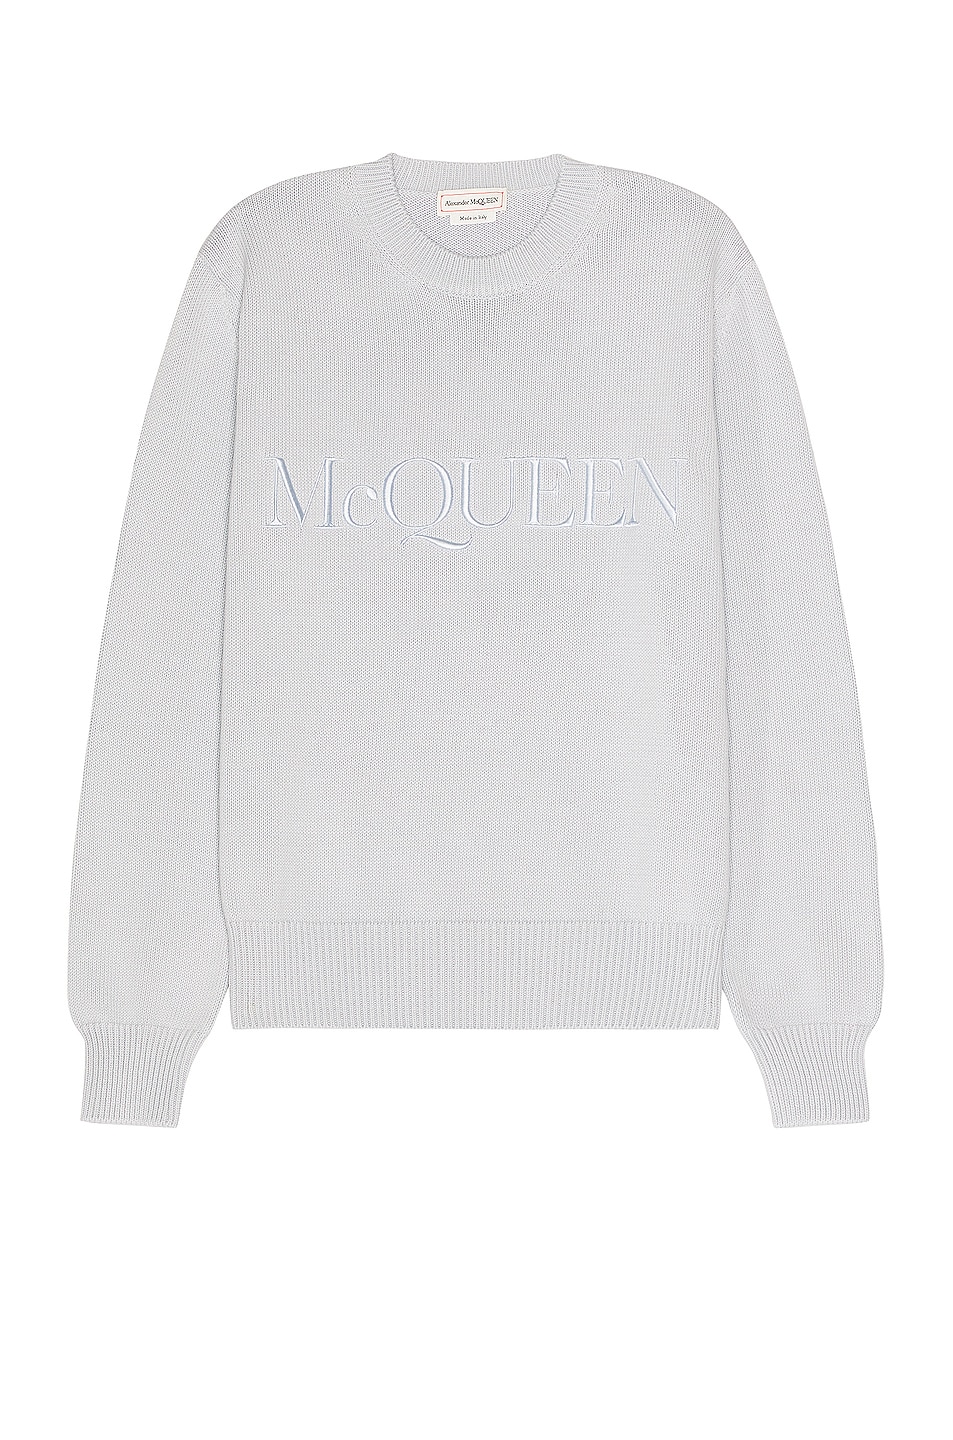 Image 1 of Alexander McQueen Logo Embroidered Crew Neck Jumper in Spring Blue